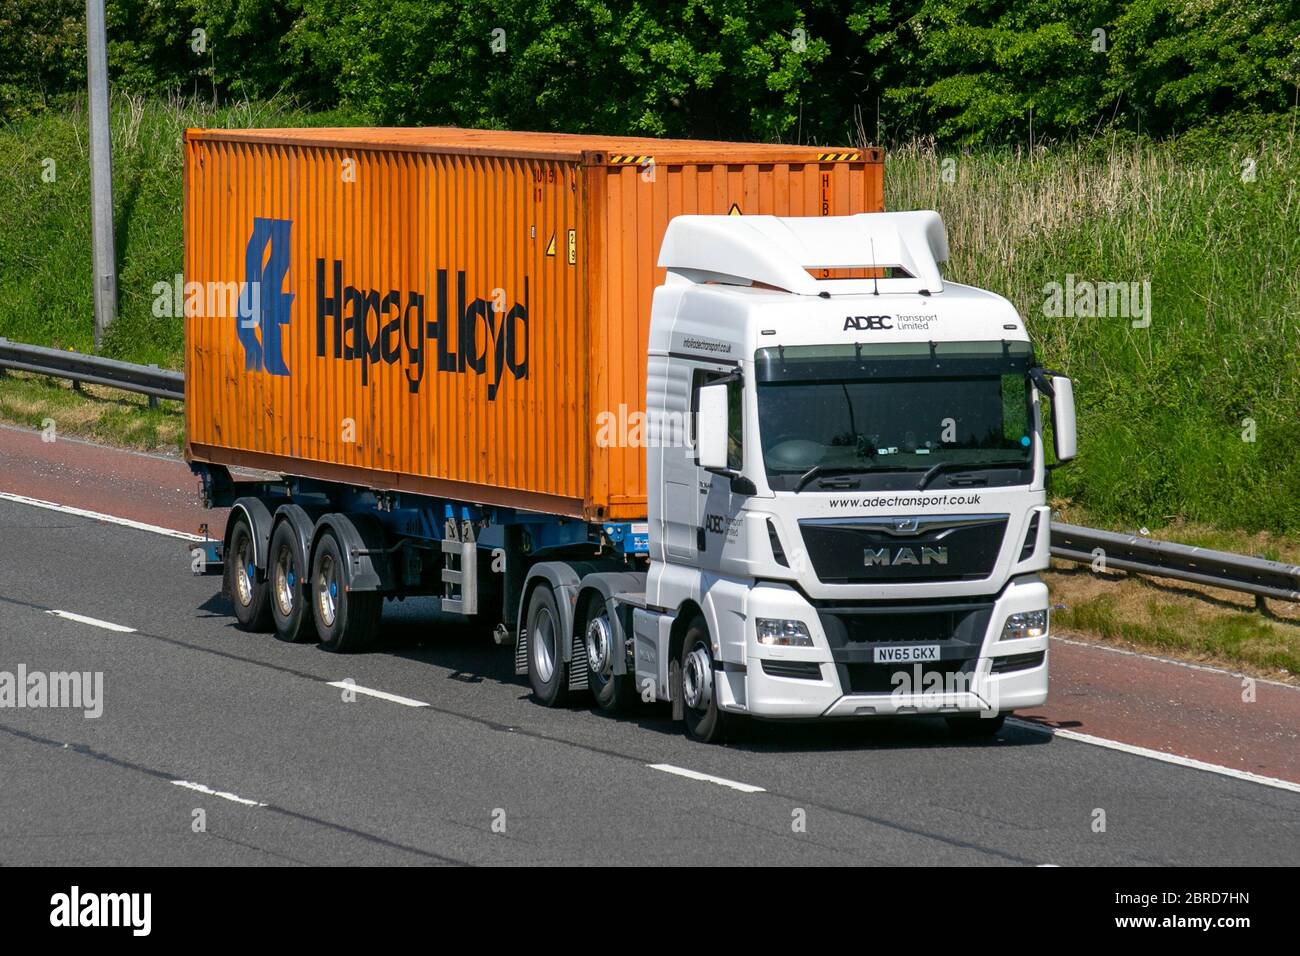 ADBC Transport Ltd; Haulage Hapag-Lloyd shipping container delivery trucks, lorry, transportation, truck, cargo carrier, Man vehicle, European commercial transport, industry, M6 at Manchester, UK Stock Photo